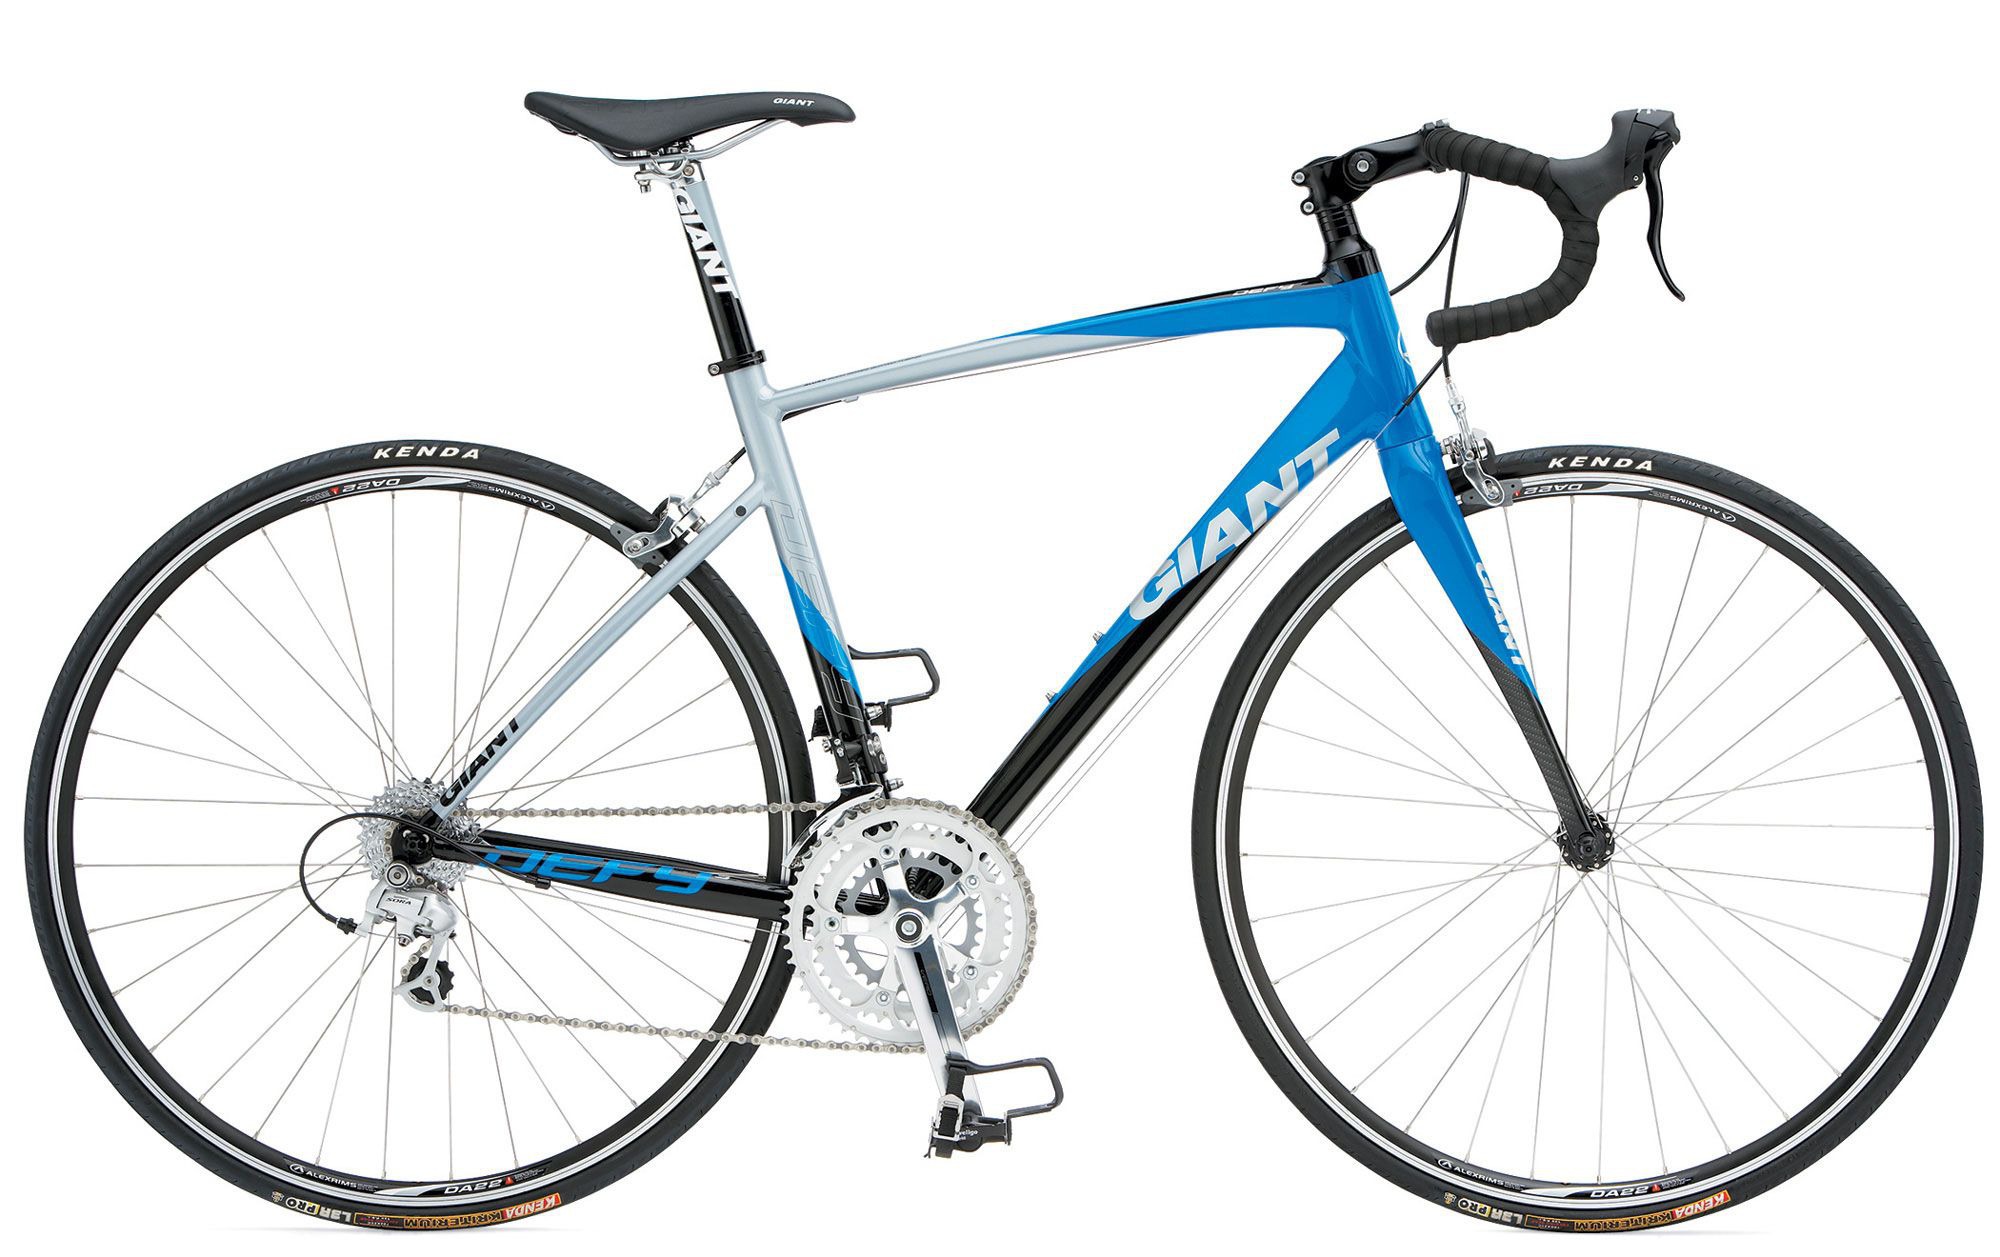 2009 Giant Defy 3 - Bicycle Details 